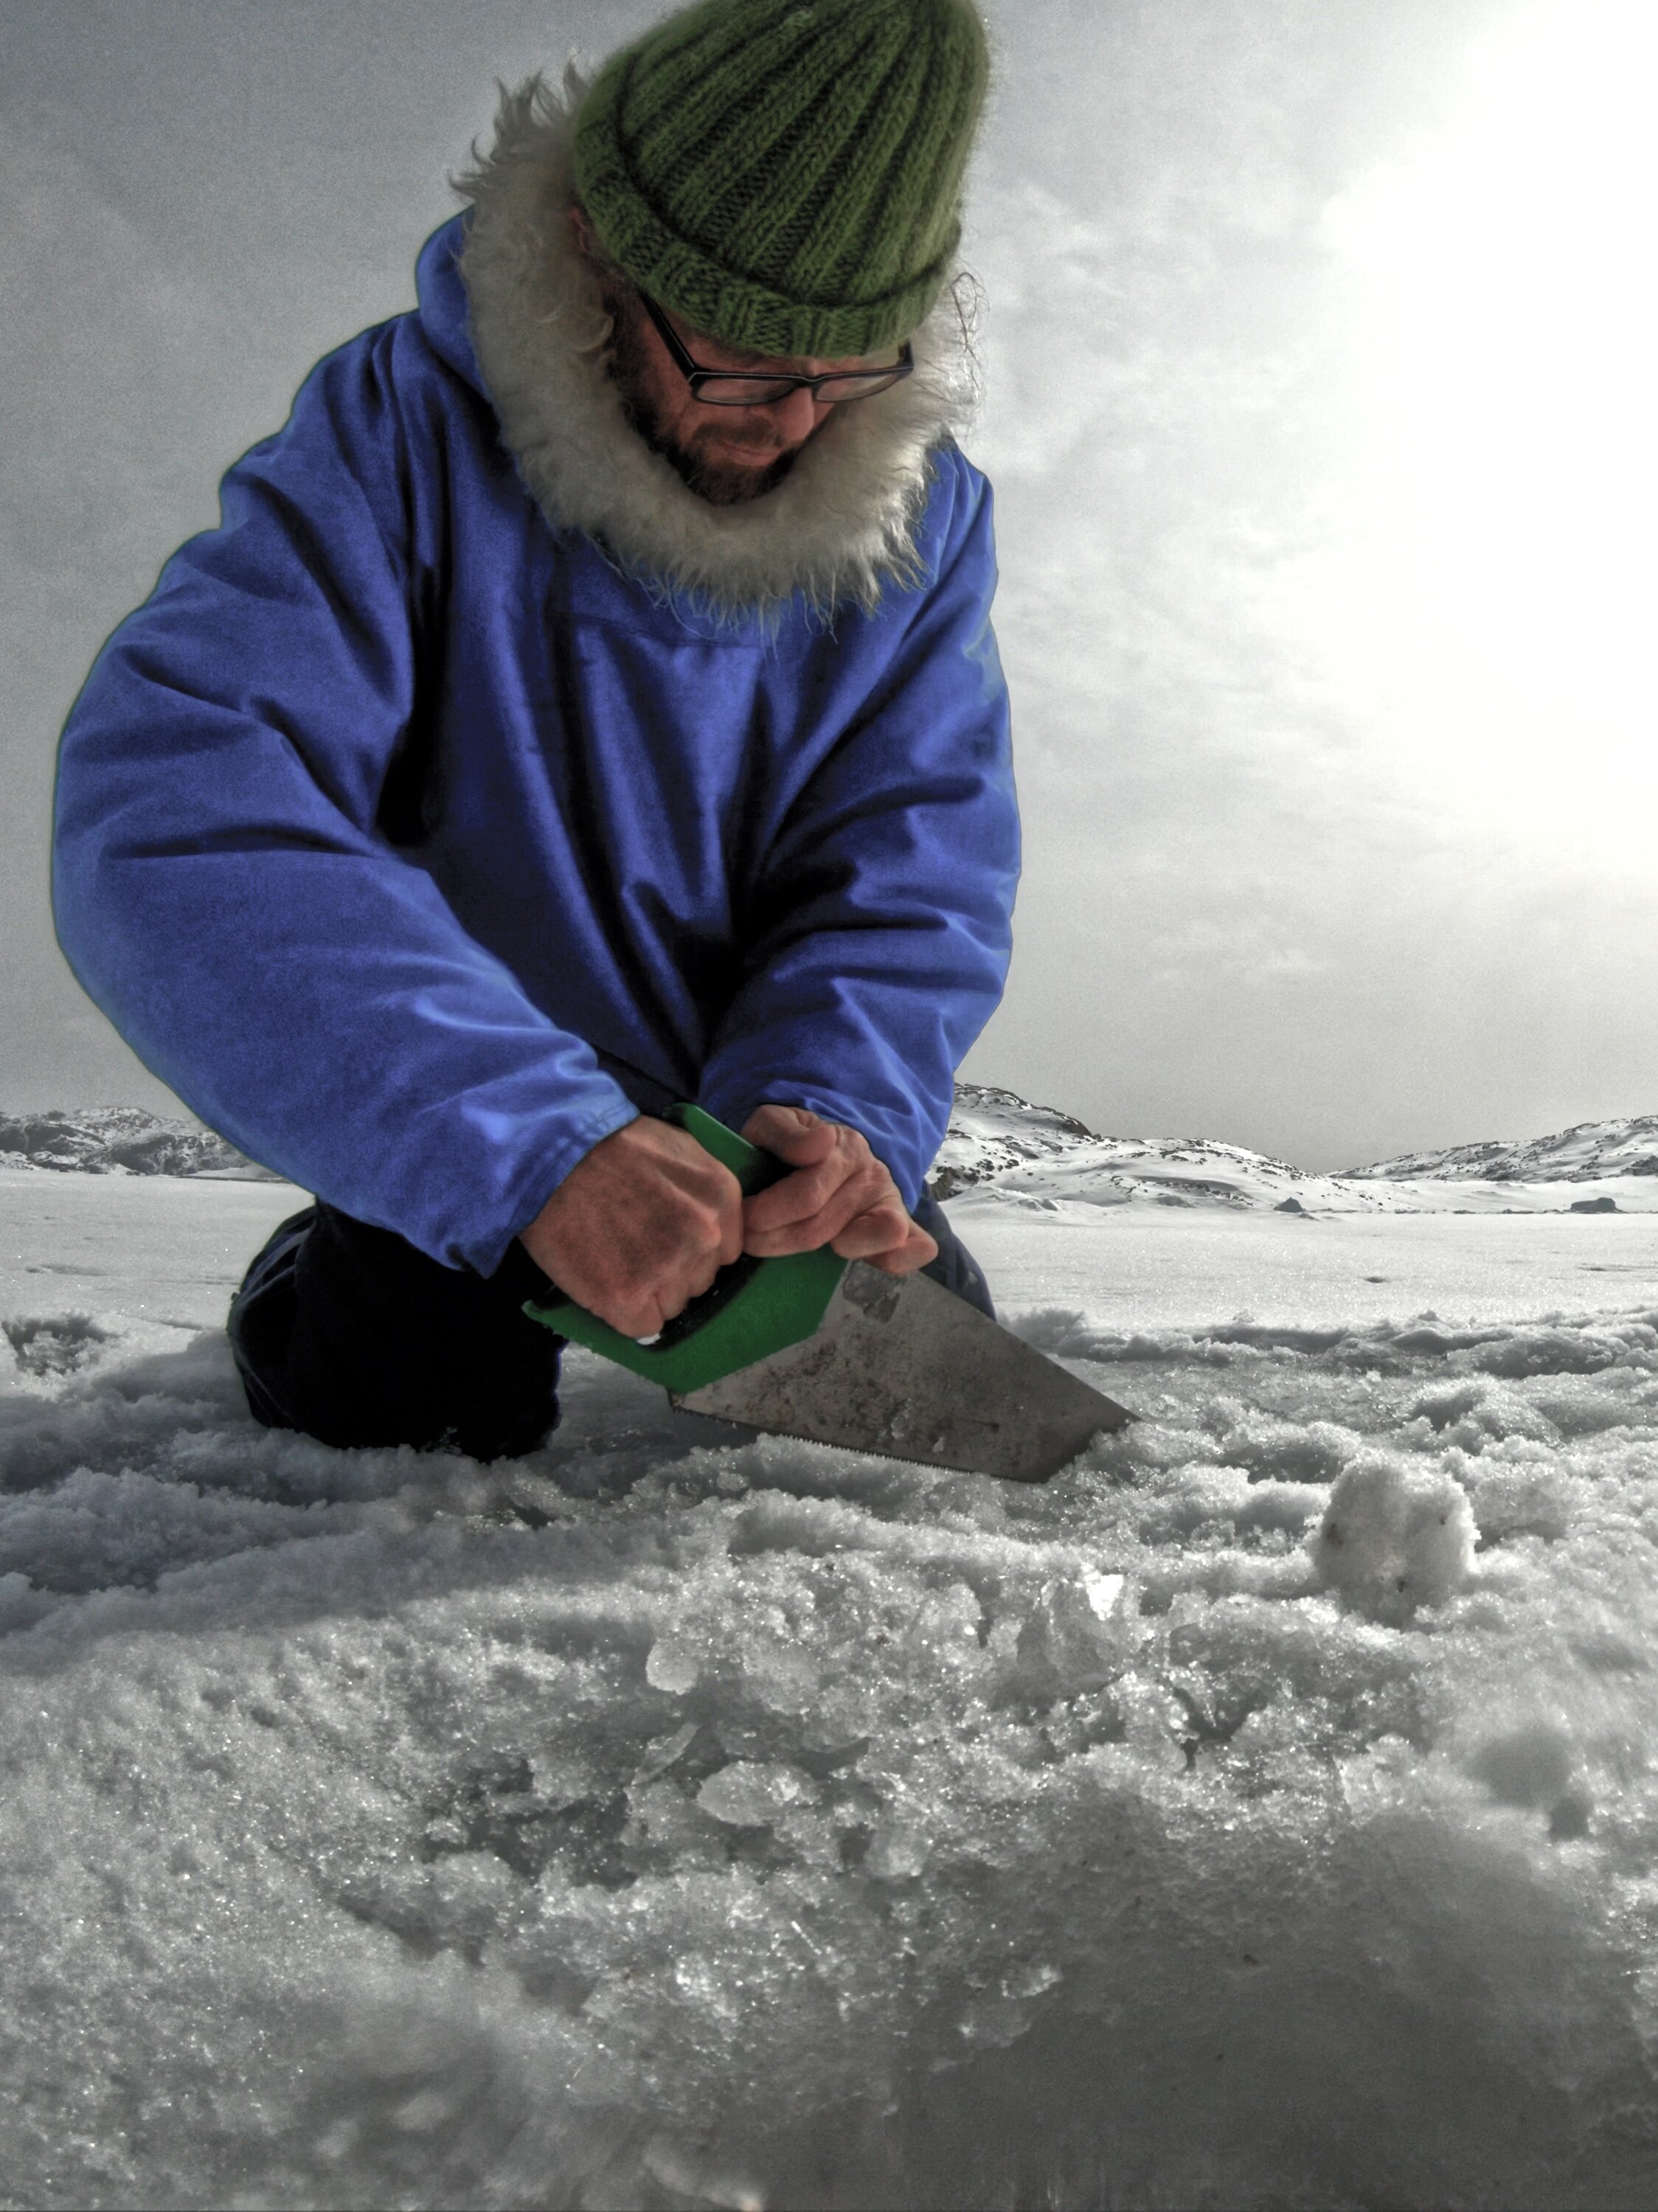 Sea Ice Project sawing the ice 1.jpg